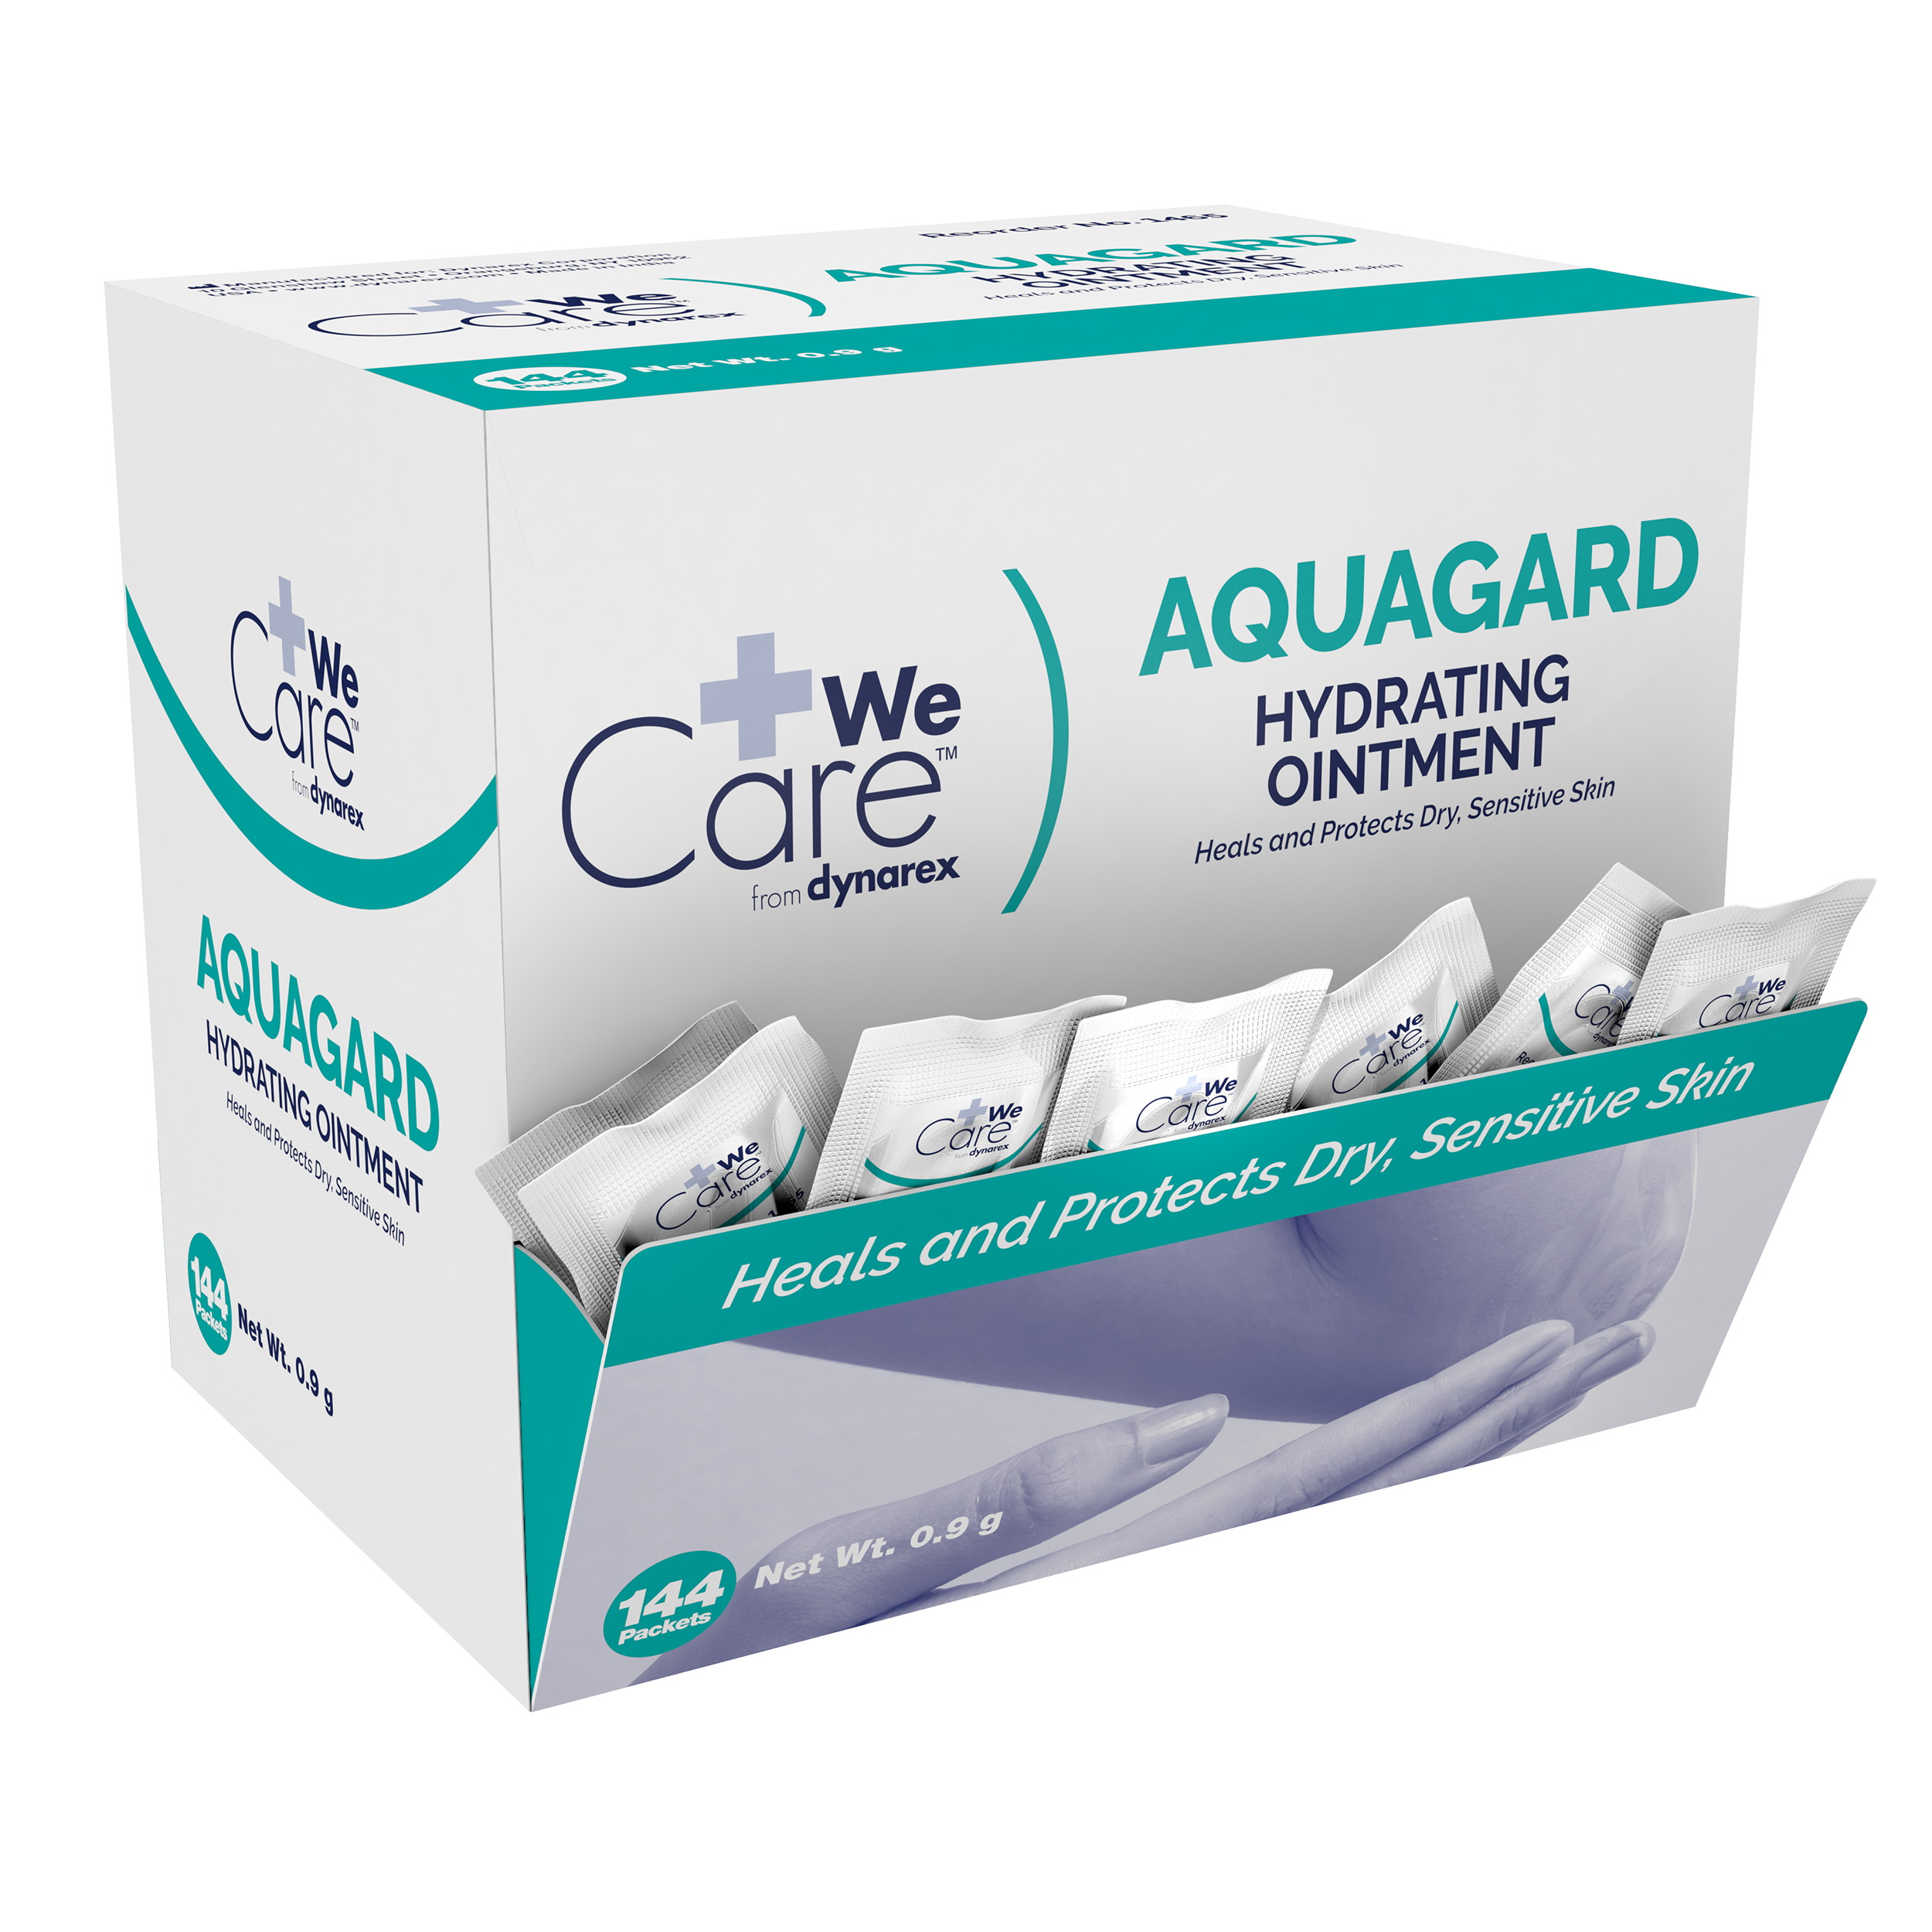 AquaGard Hydrating Ointment 0.9grams Packets